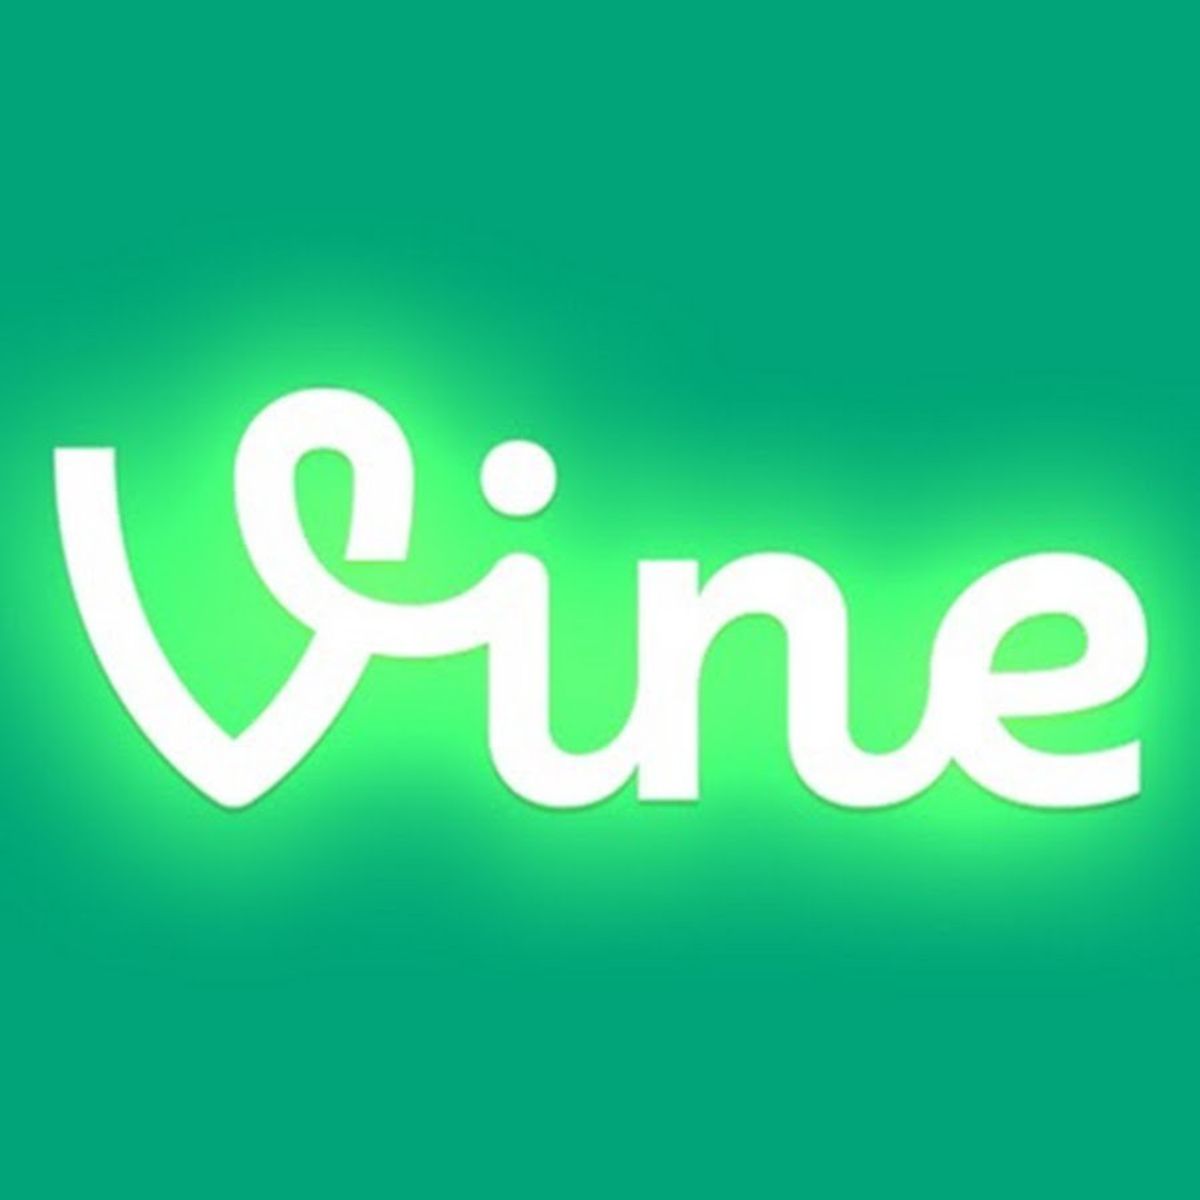 Rest in Peace, Vine.